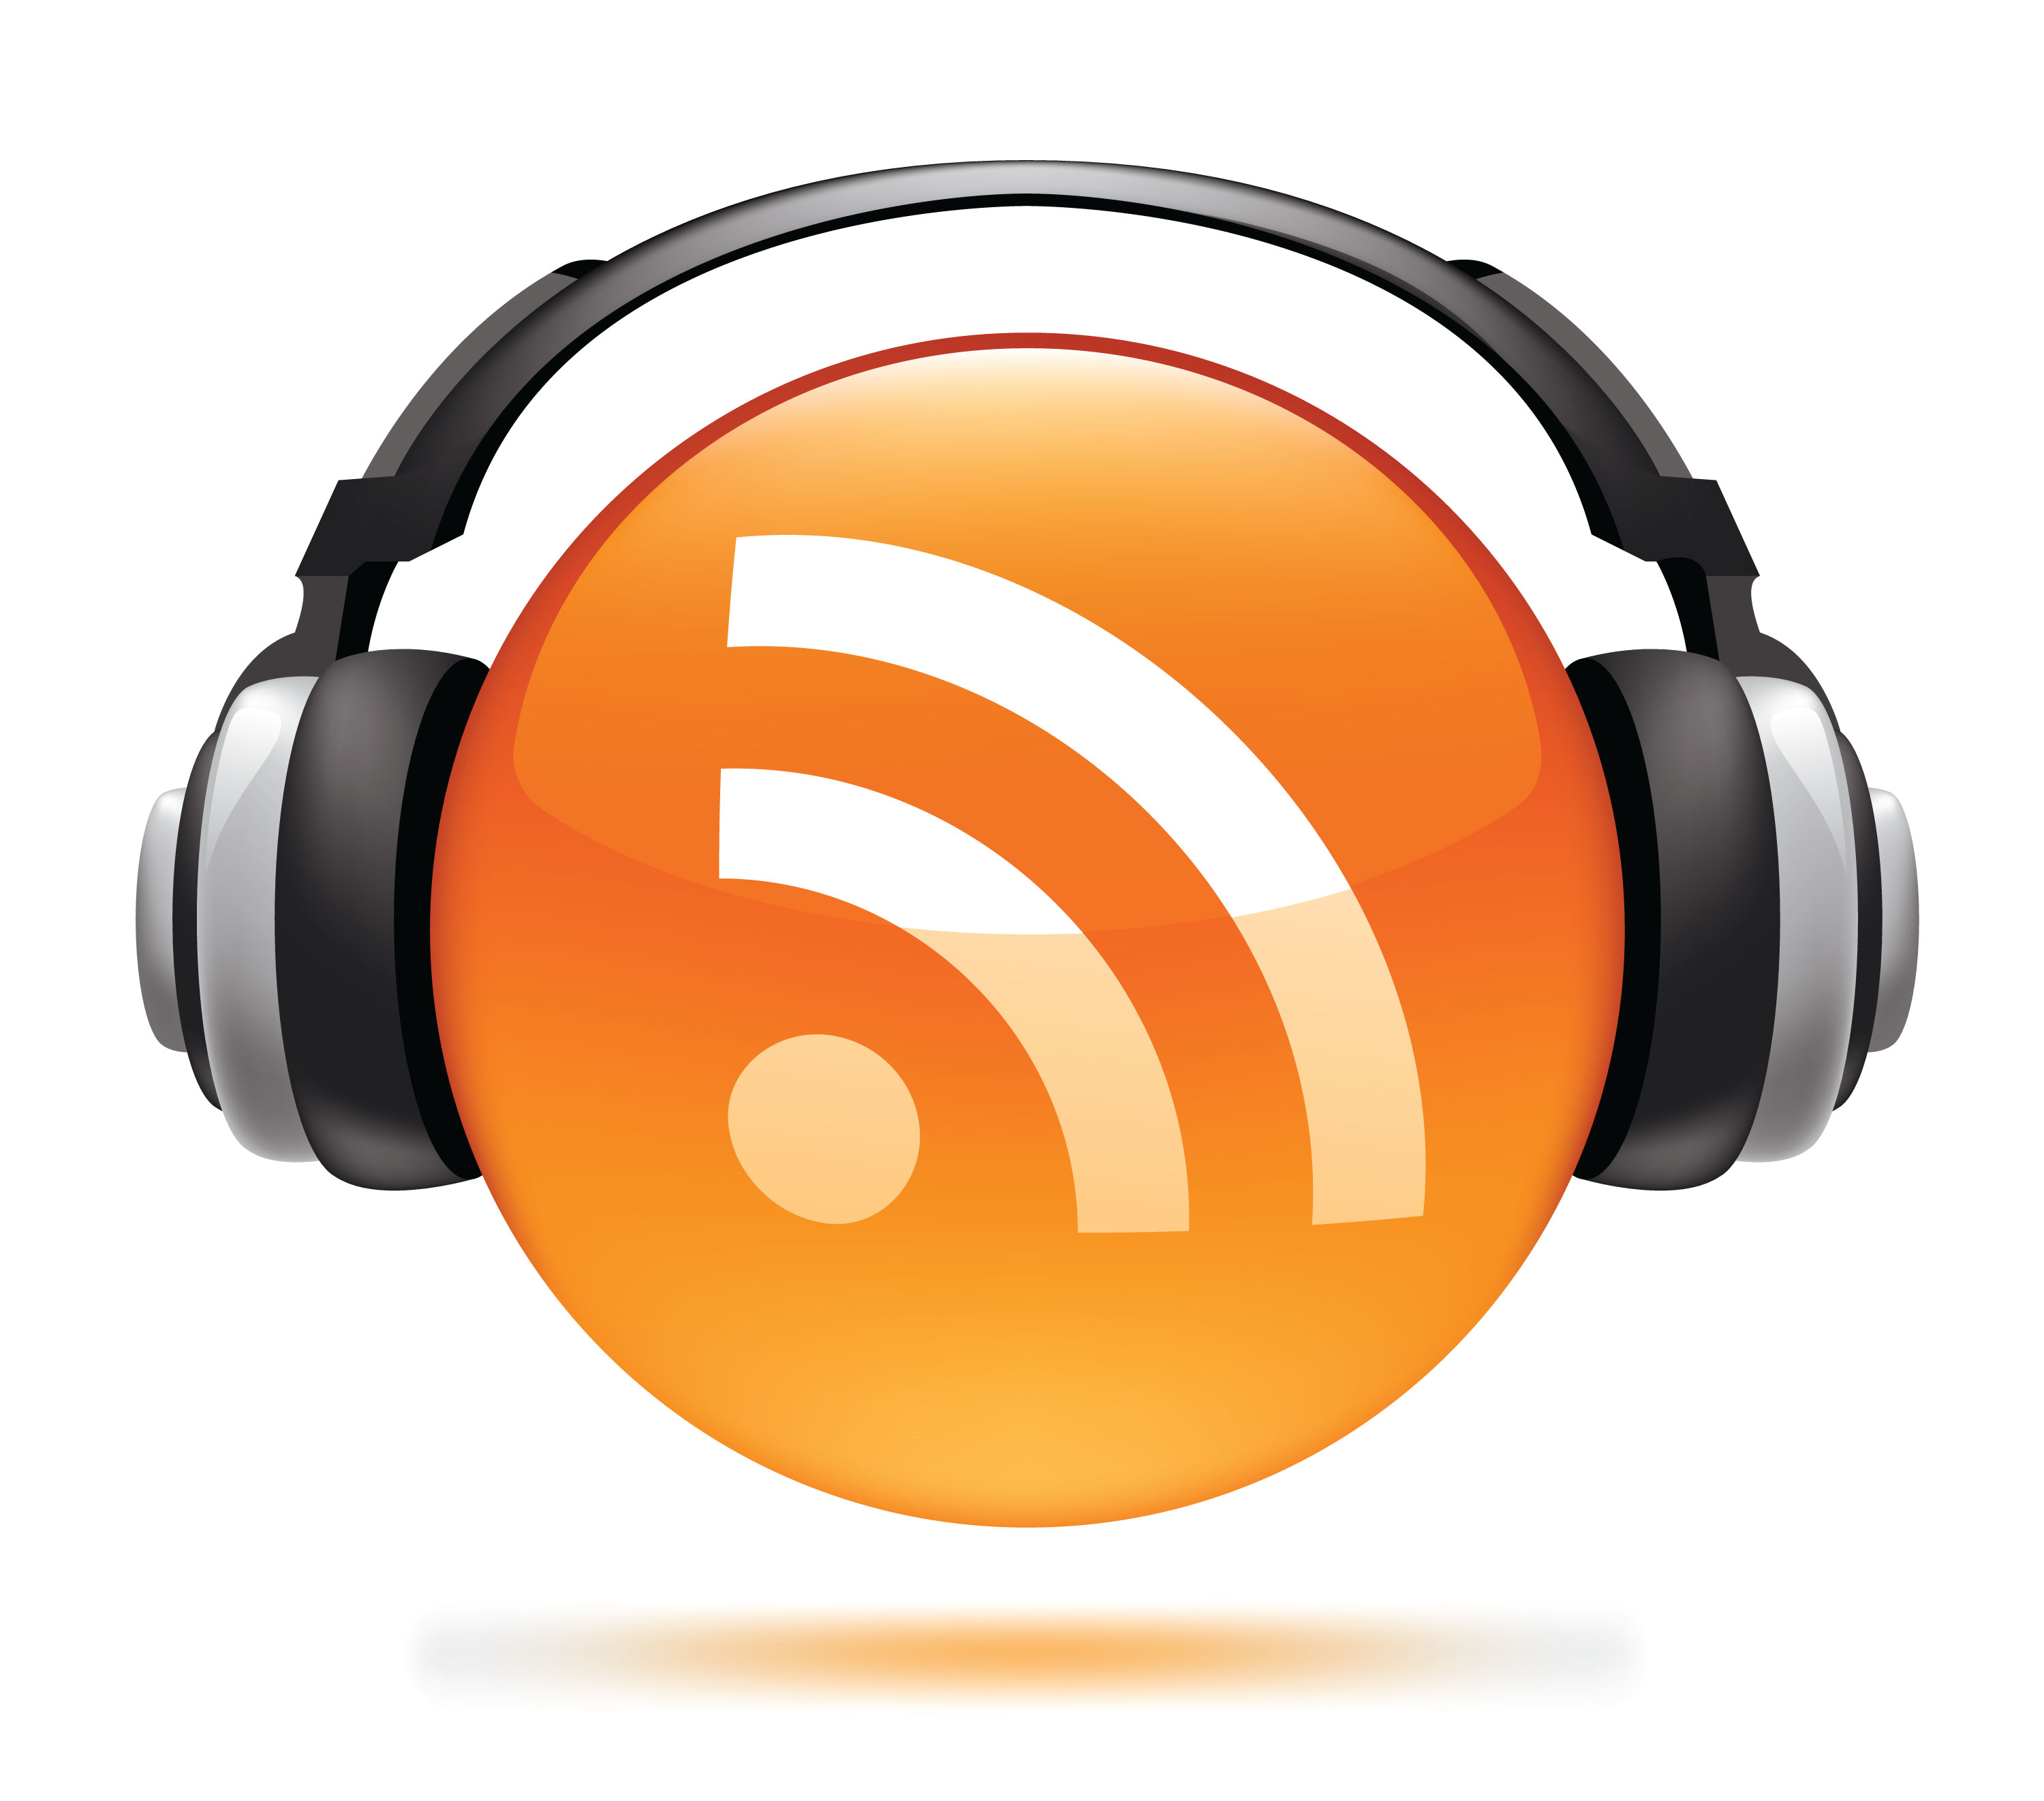 Host your very one Podcast from your NAS with Subscribers, RSS